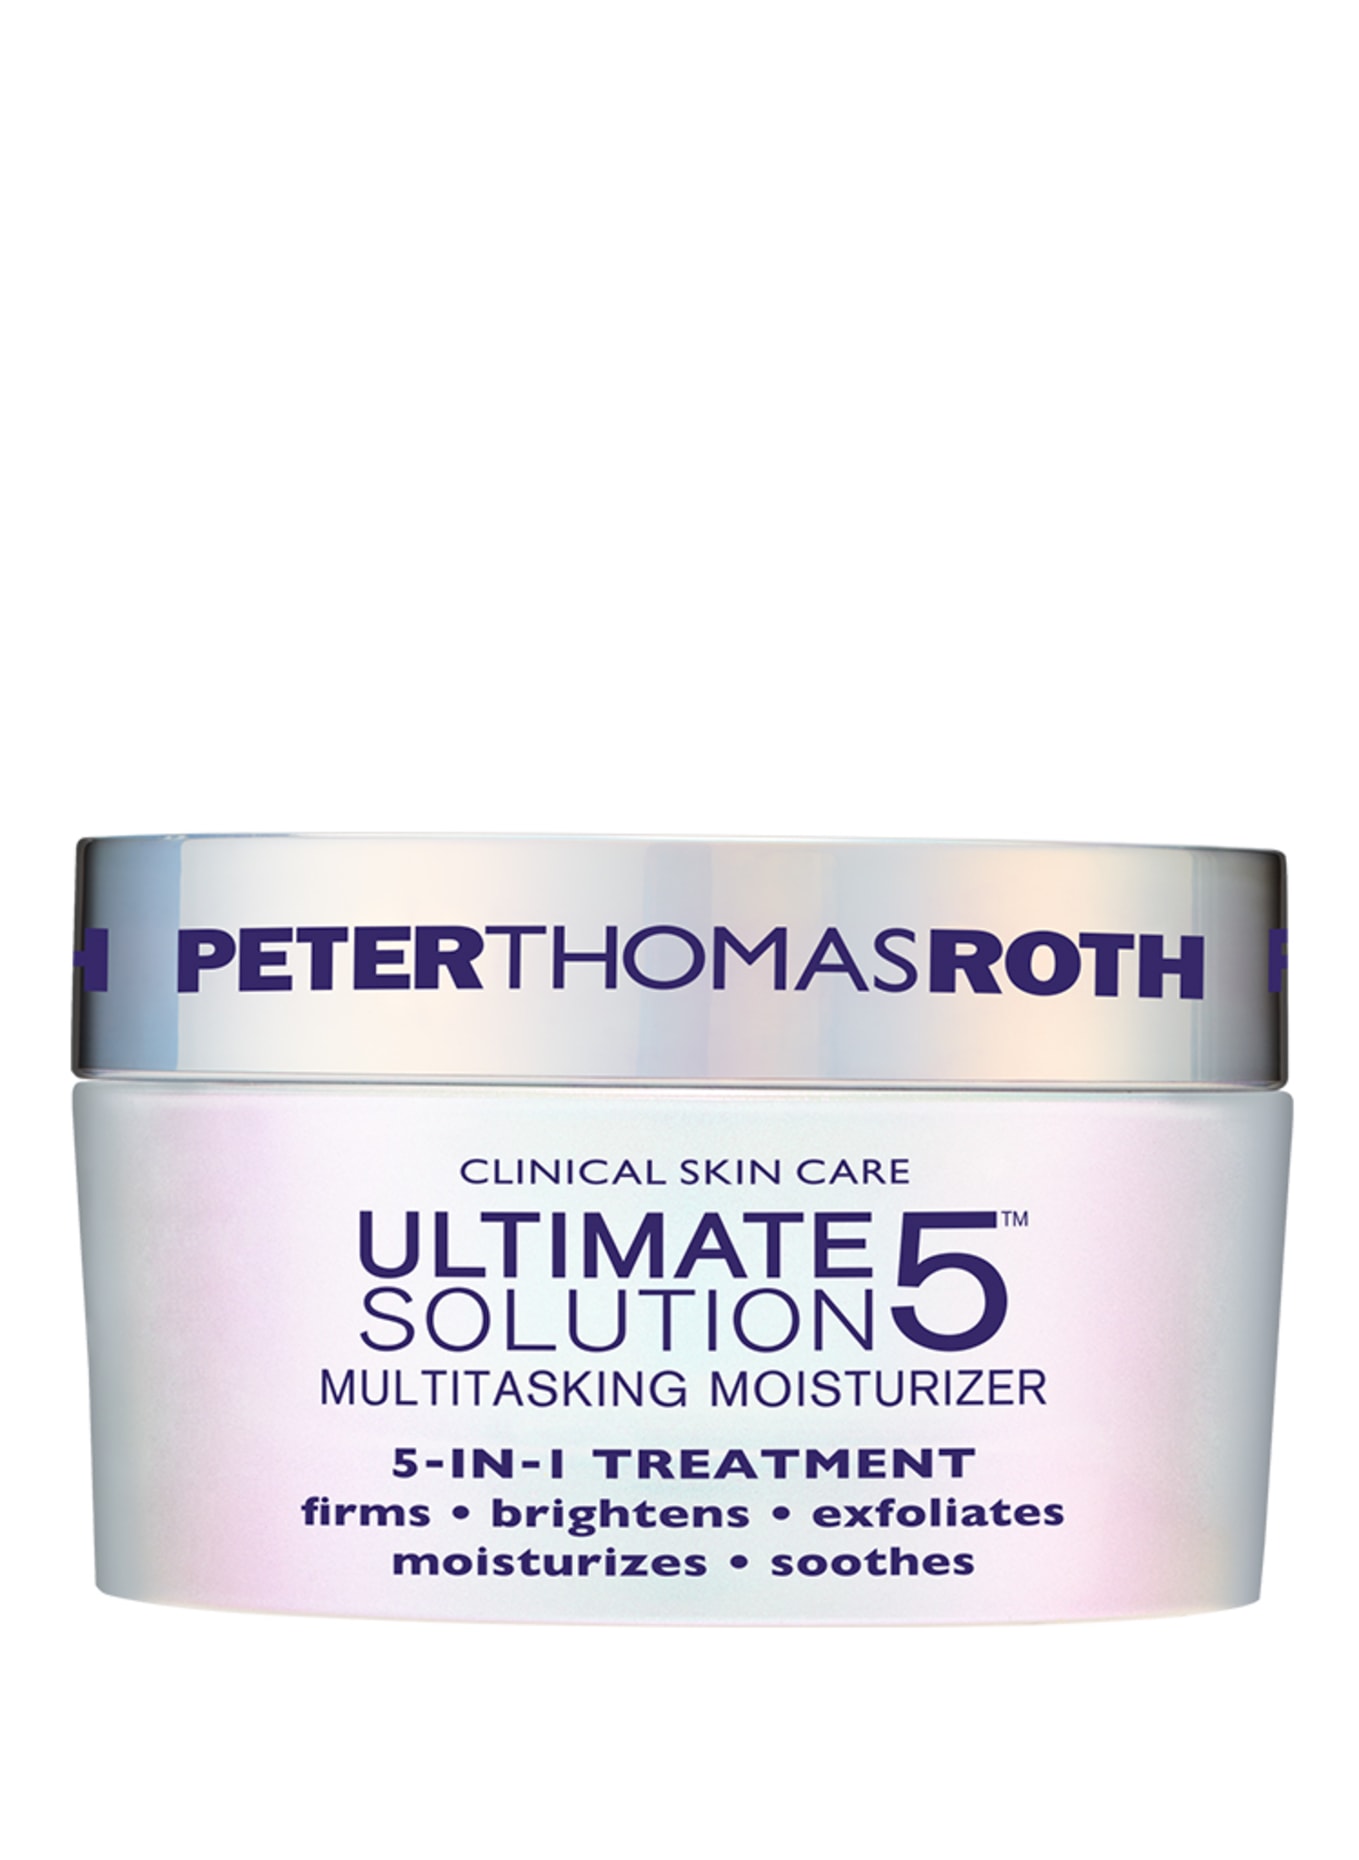 PETER THOMAS ROTH ULTIMATE SOLUTION 5 (Obrázek 1)